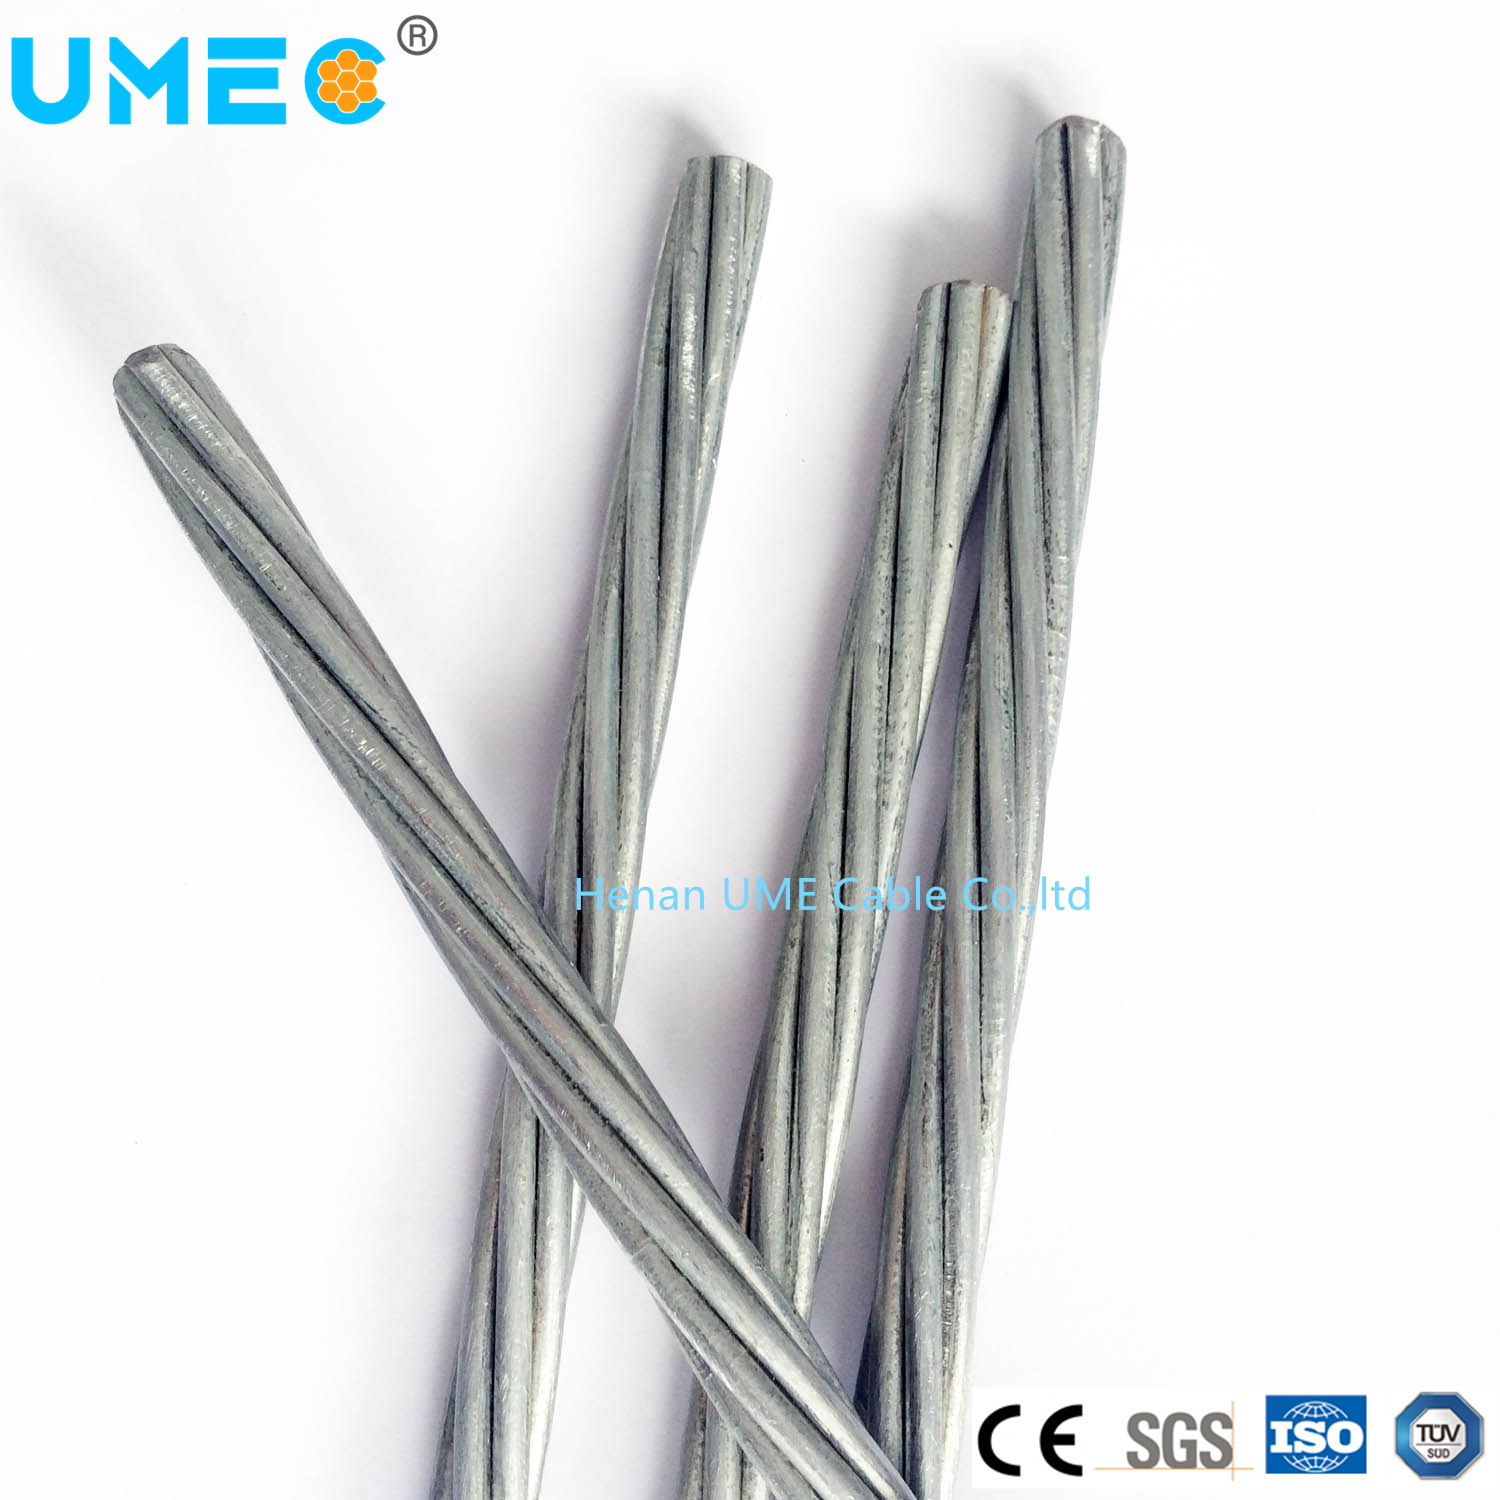 ASTM 5/16 Ehs Galvanized Strand Steel Wire for Cable Armouring